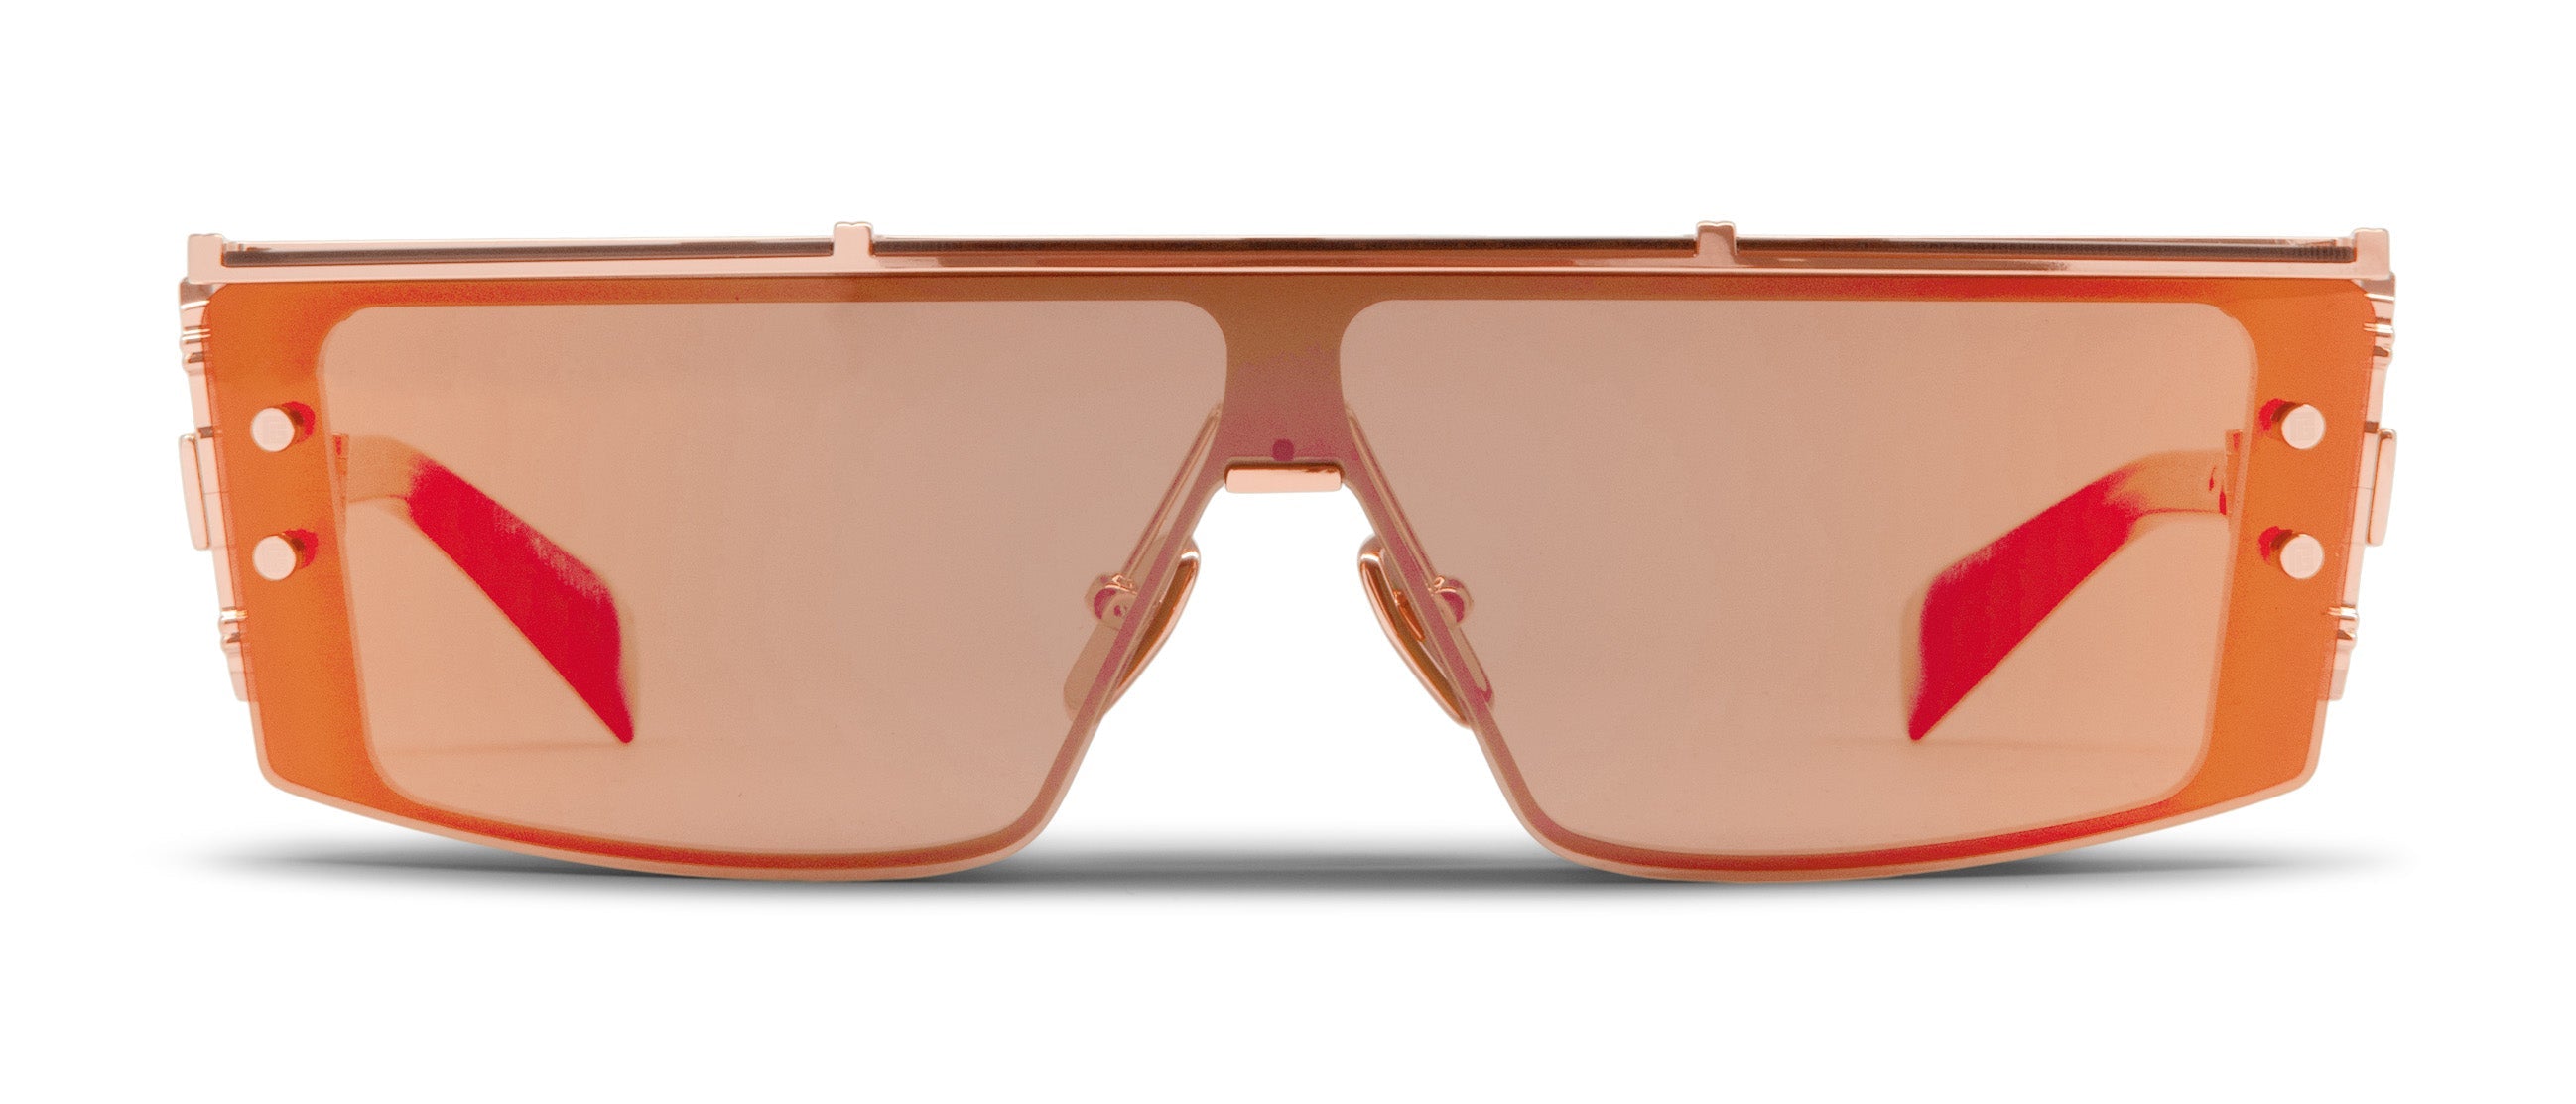 Louis Vuitton My LV Chain Two Square Sunglasses Pink Metal. Size U